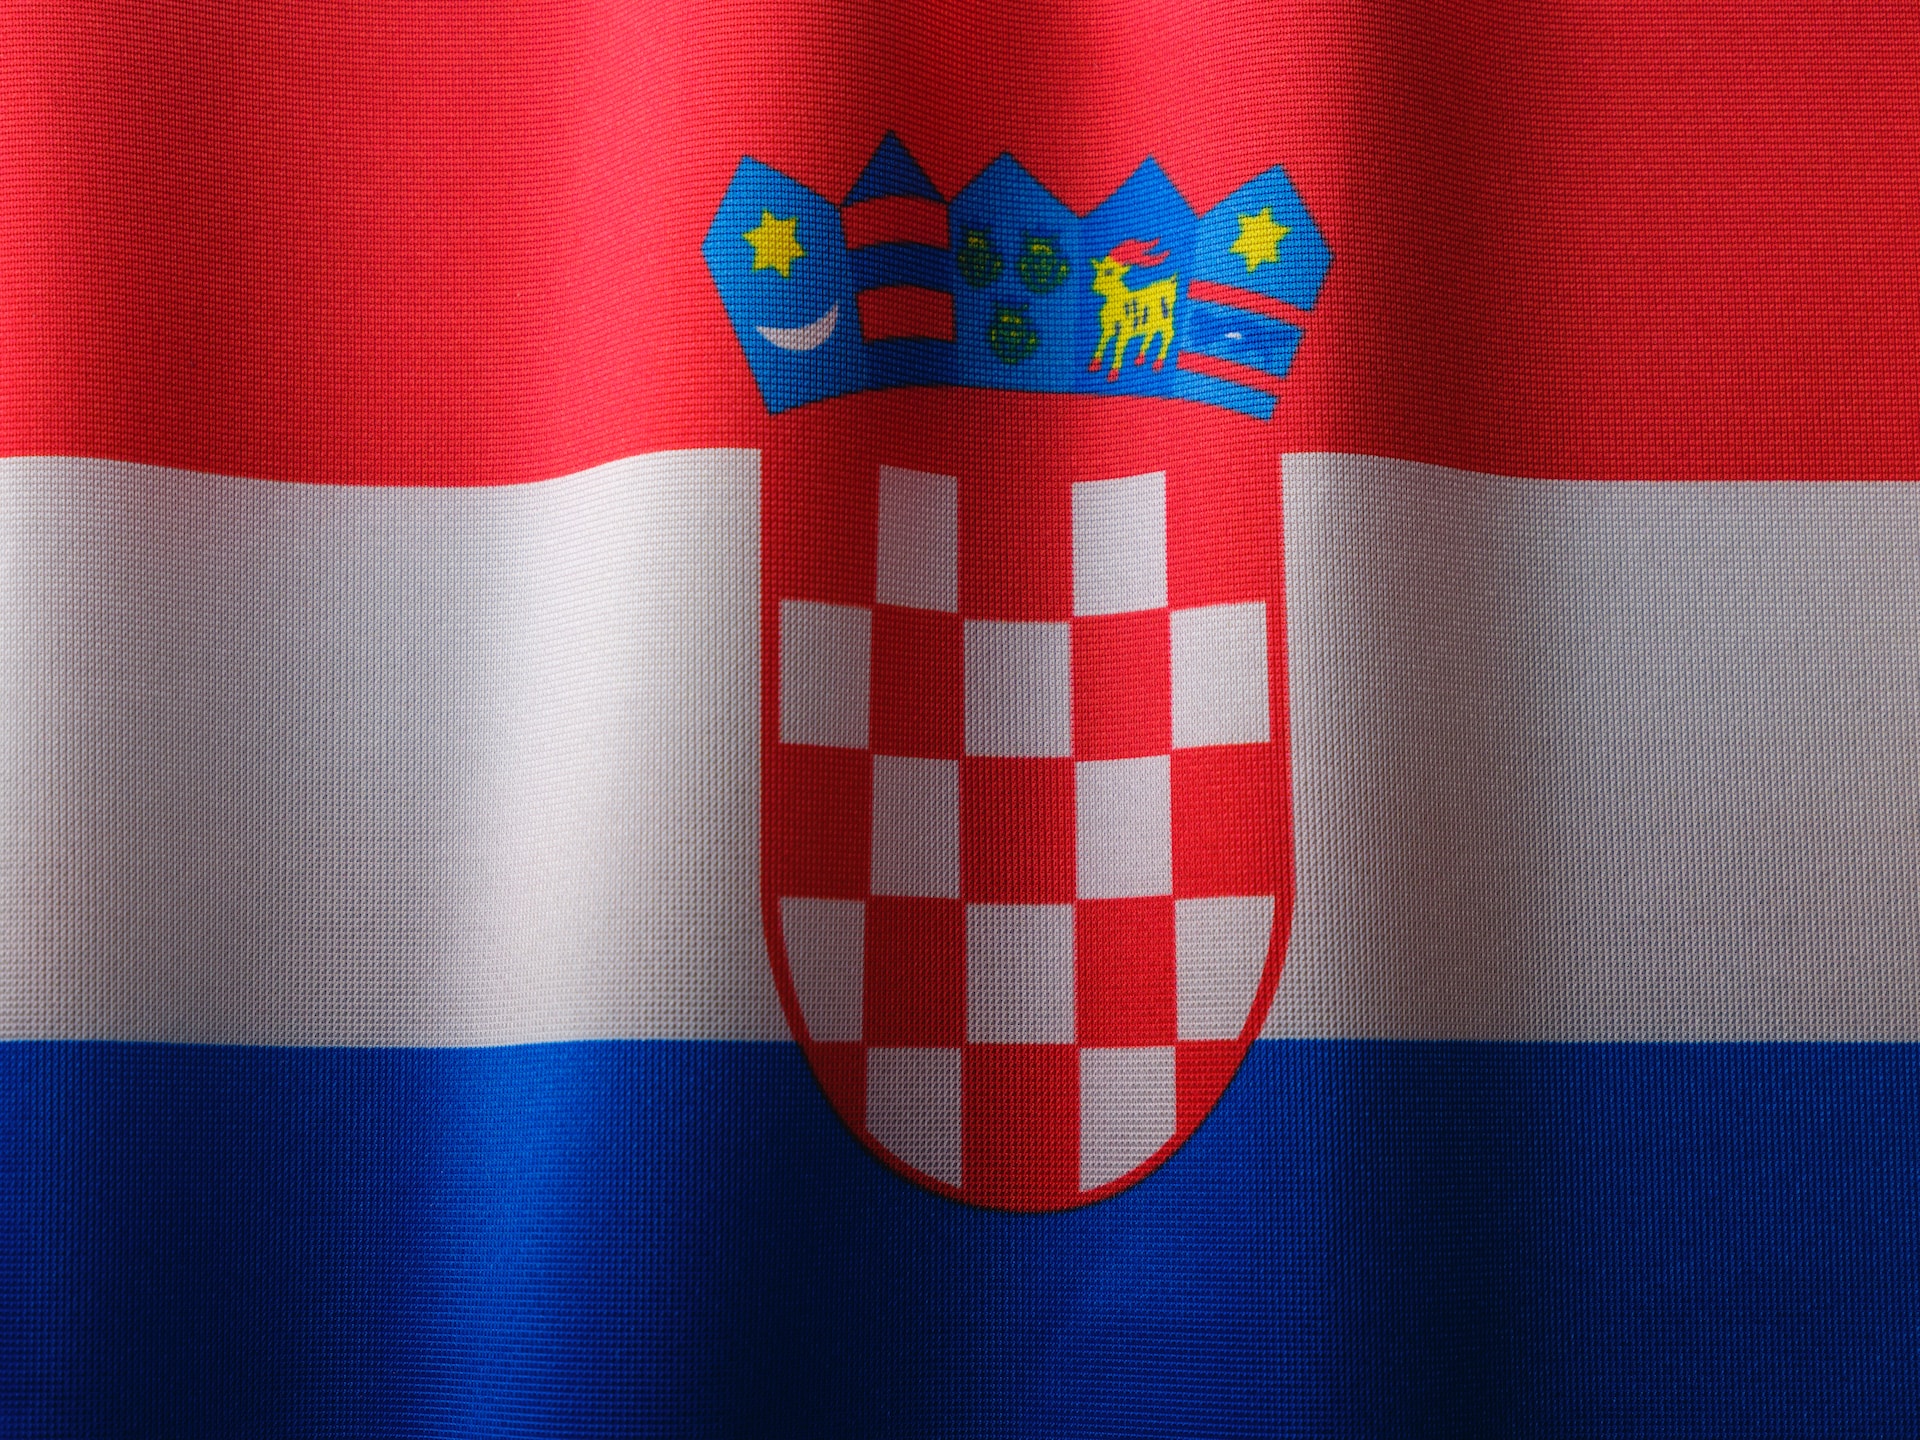 Employment Rules and Regulations in Croatia